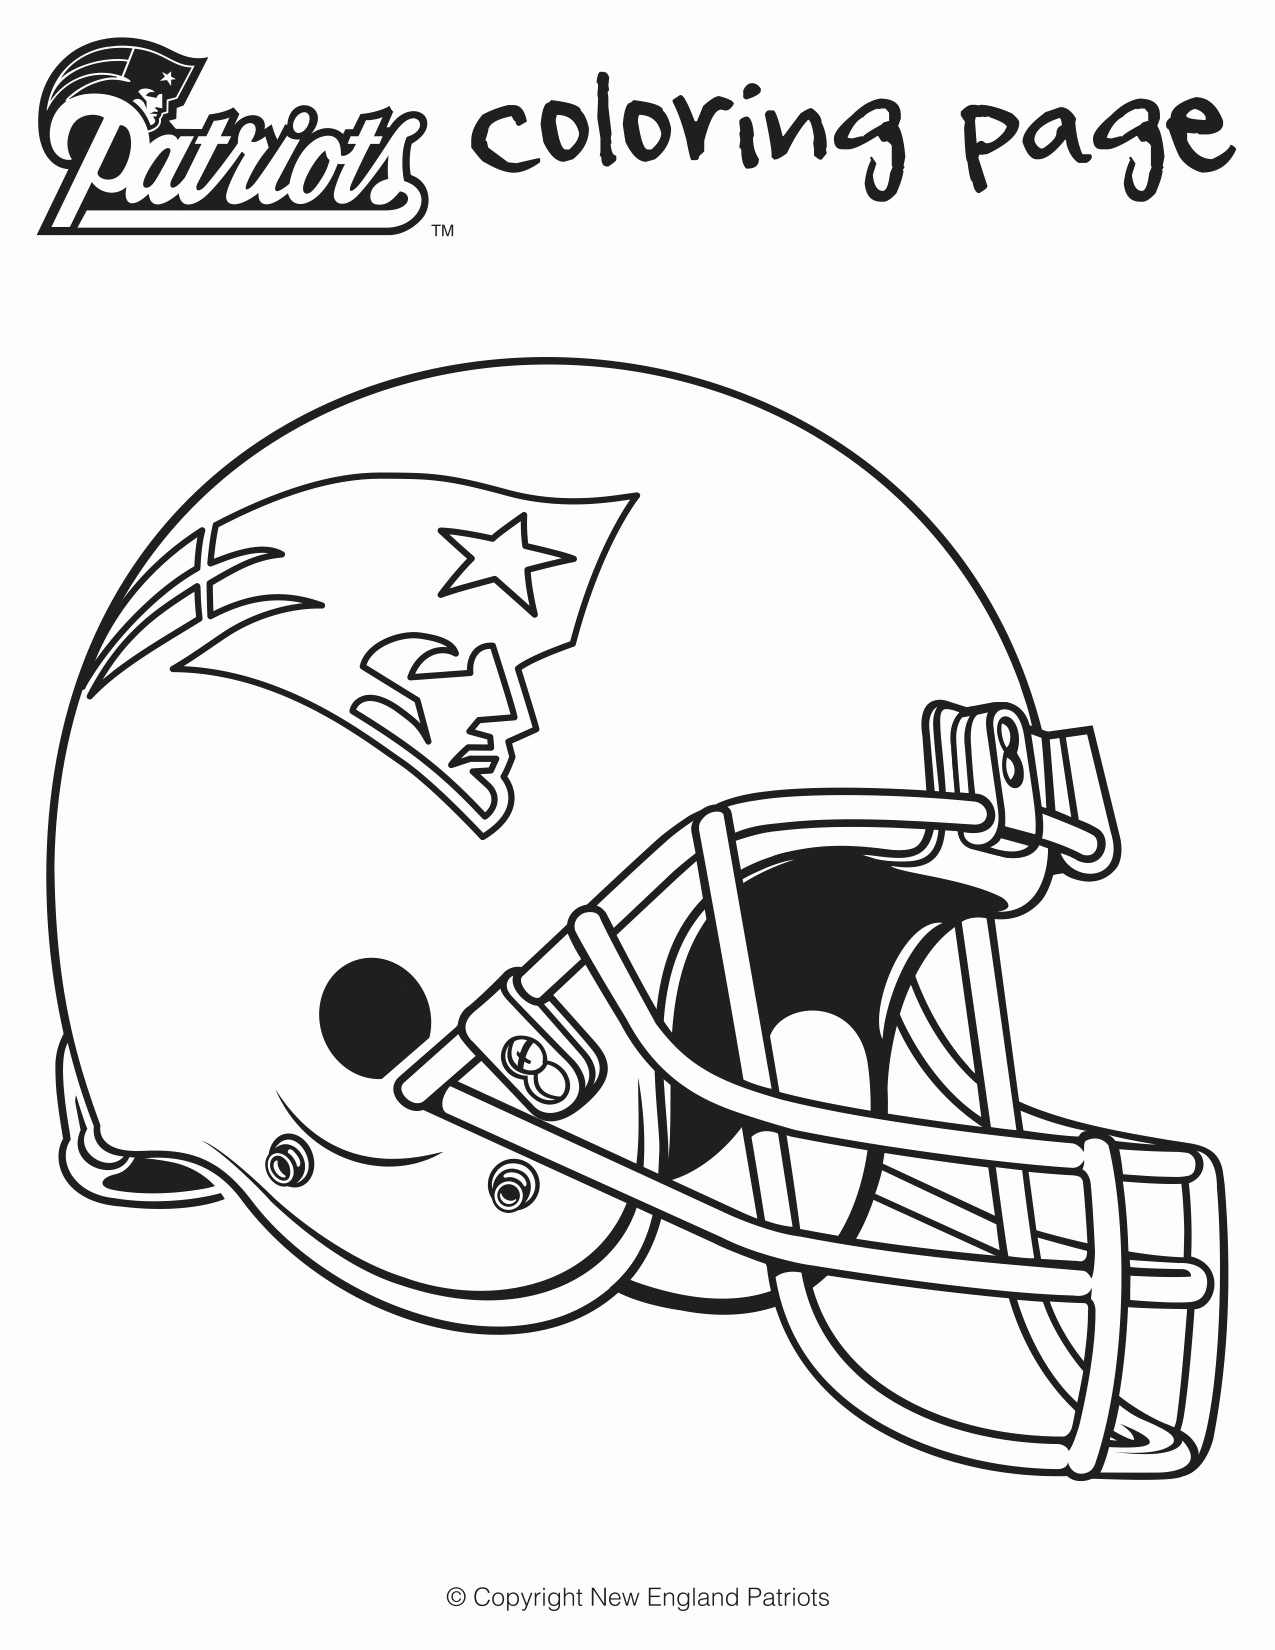 Super Bowl 2017 Coloring Pages - Coloring Home1275 x 1650